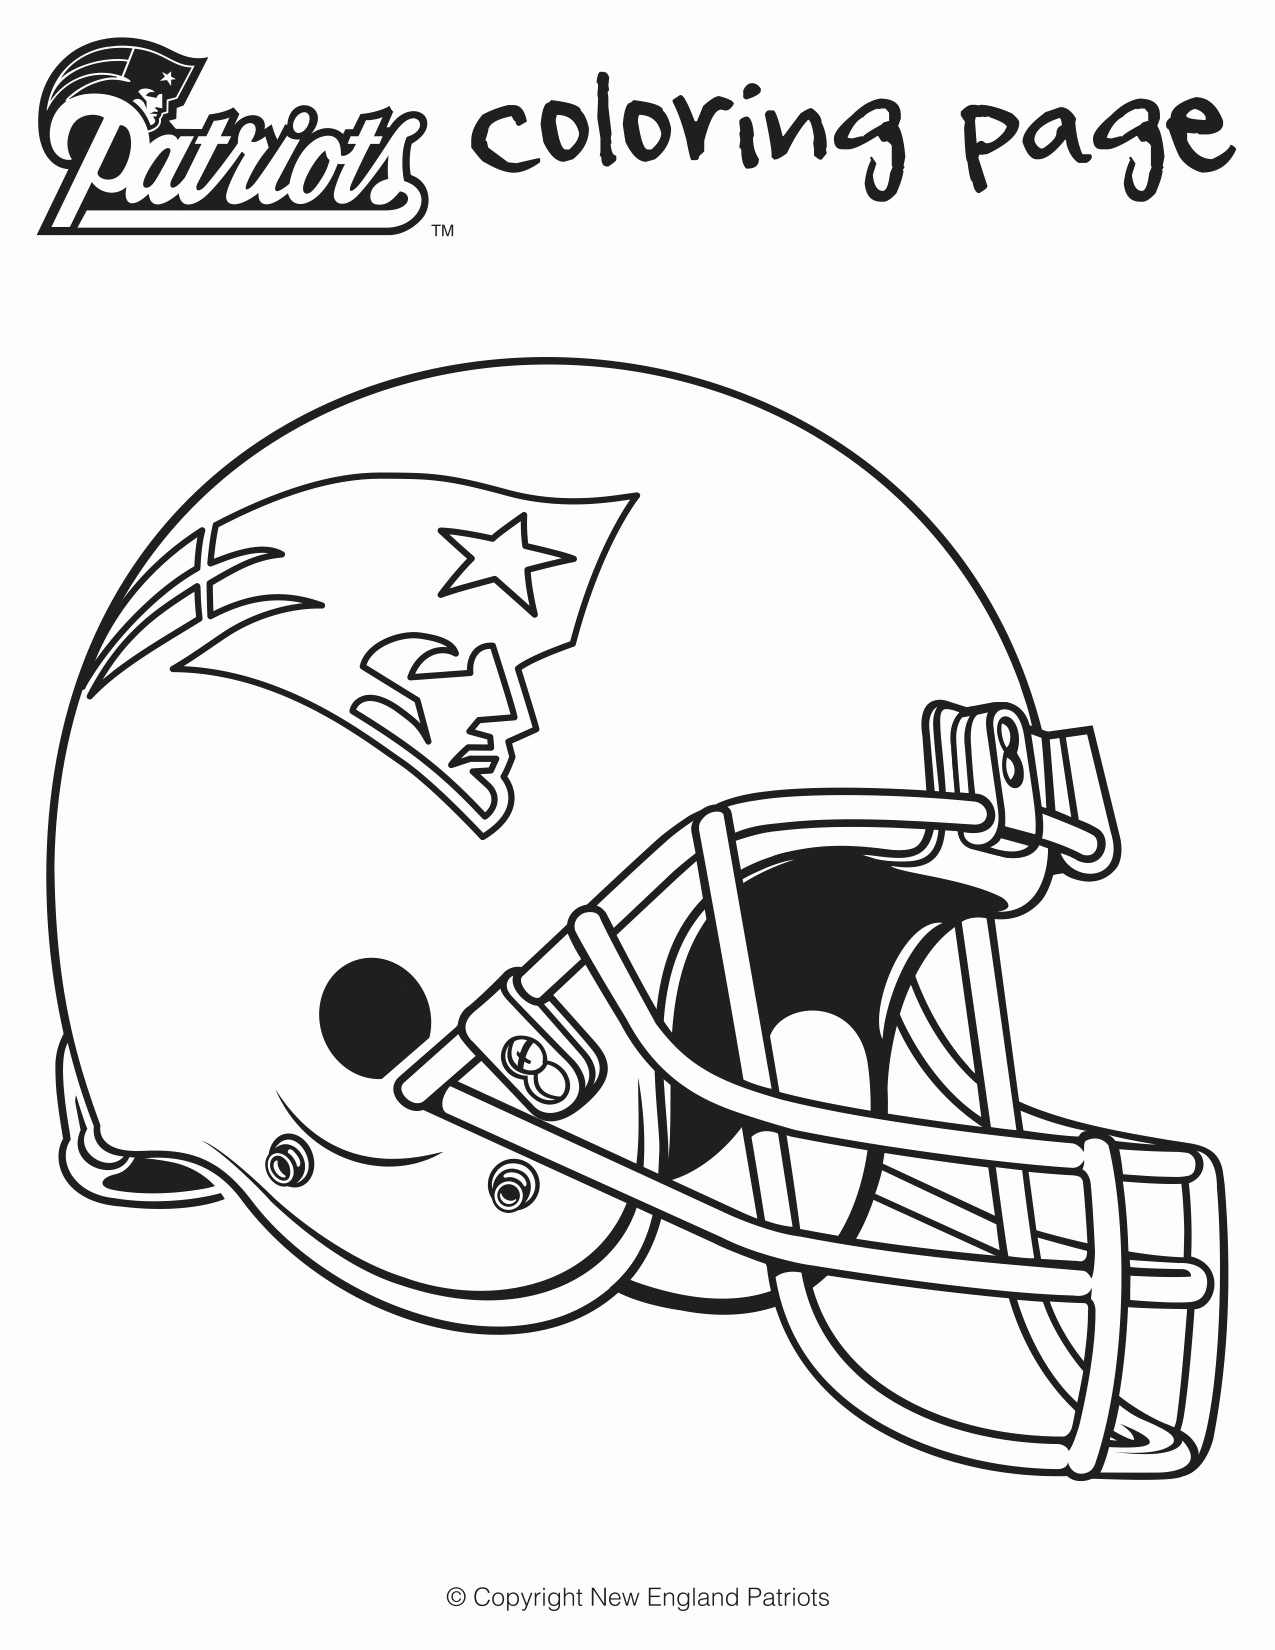 Super Bowl 2017 Coloring Pages - Coloring Home1275 x 1650